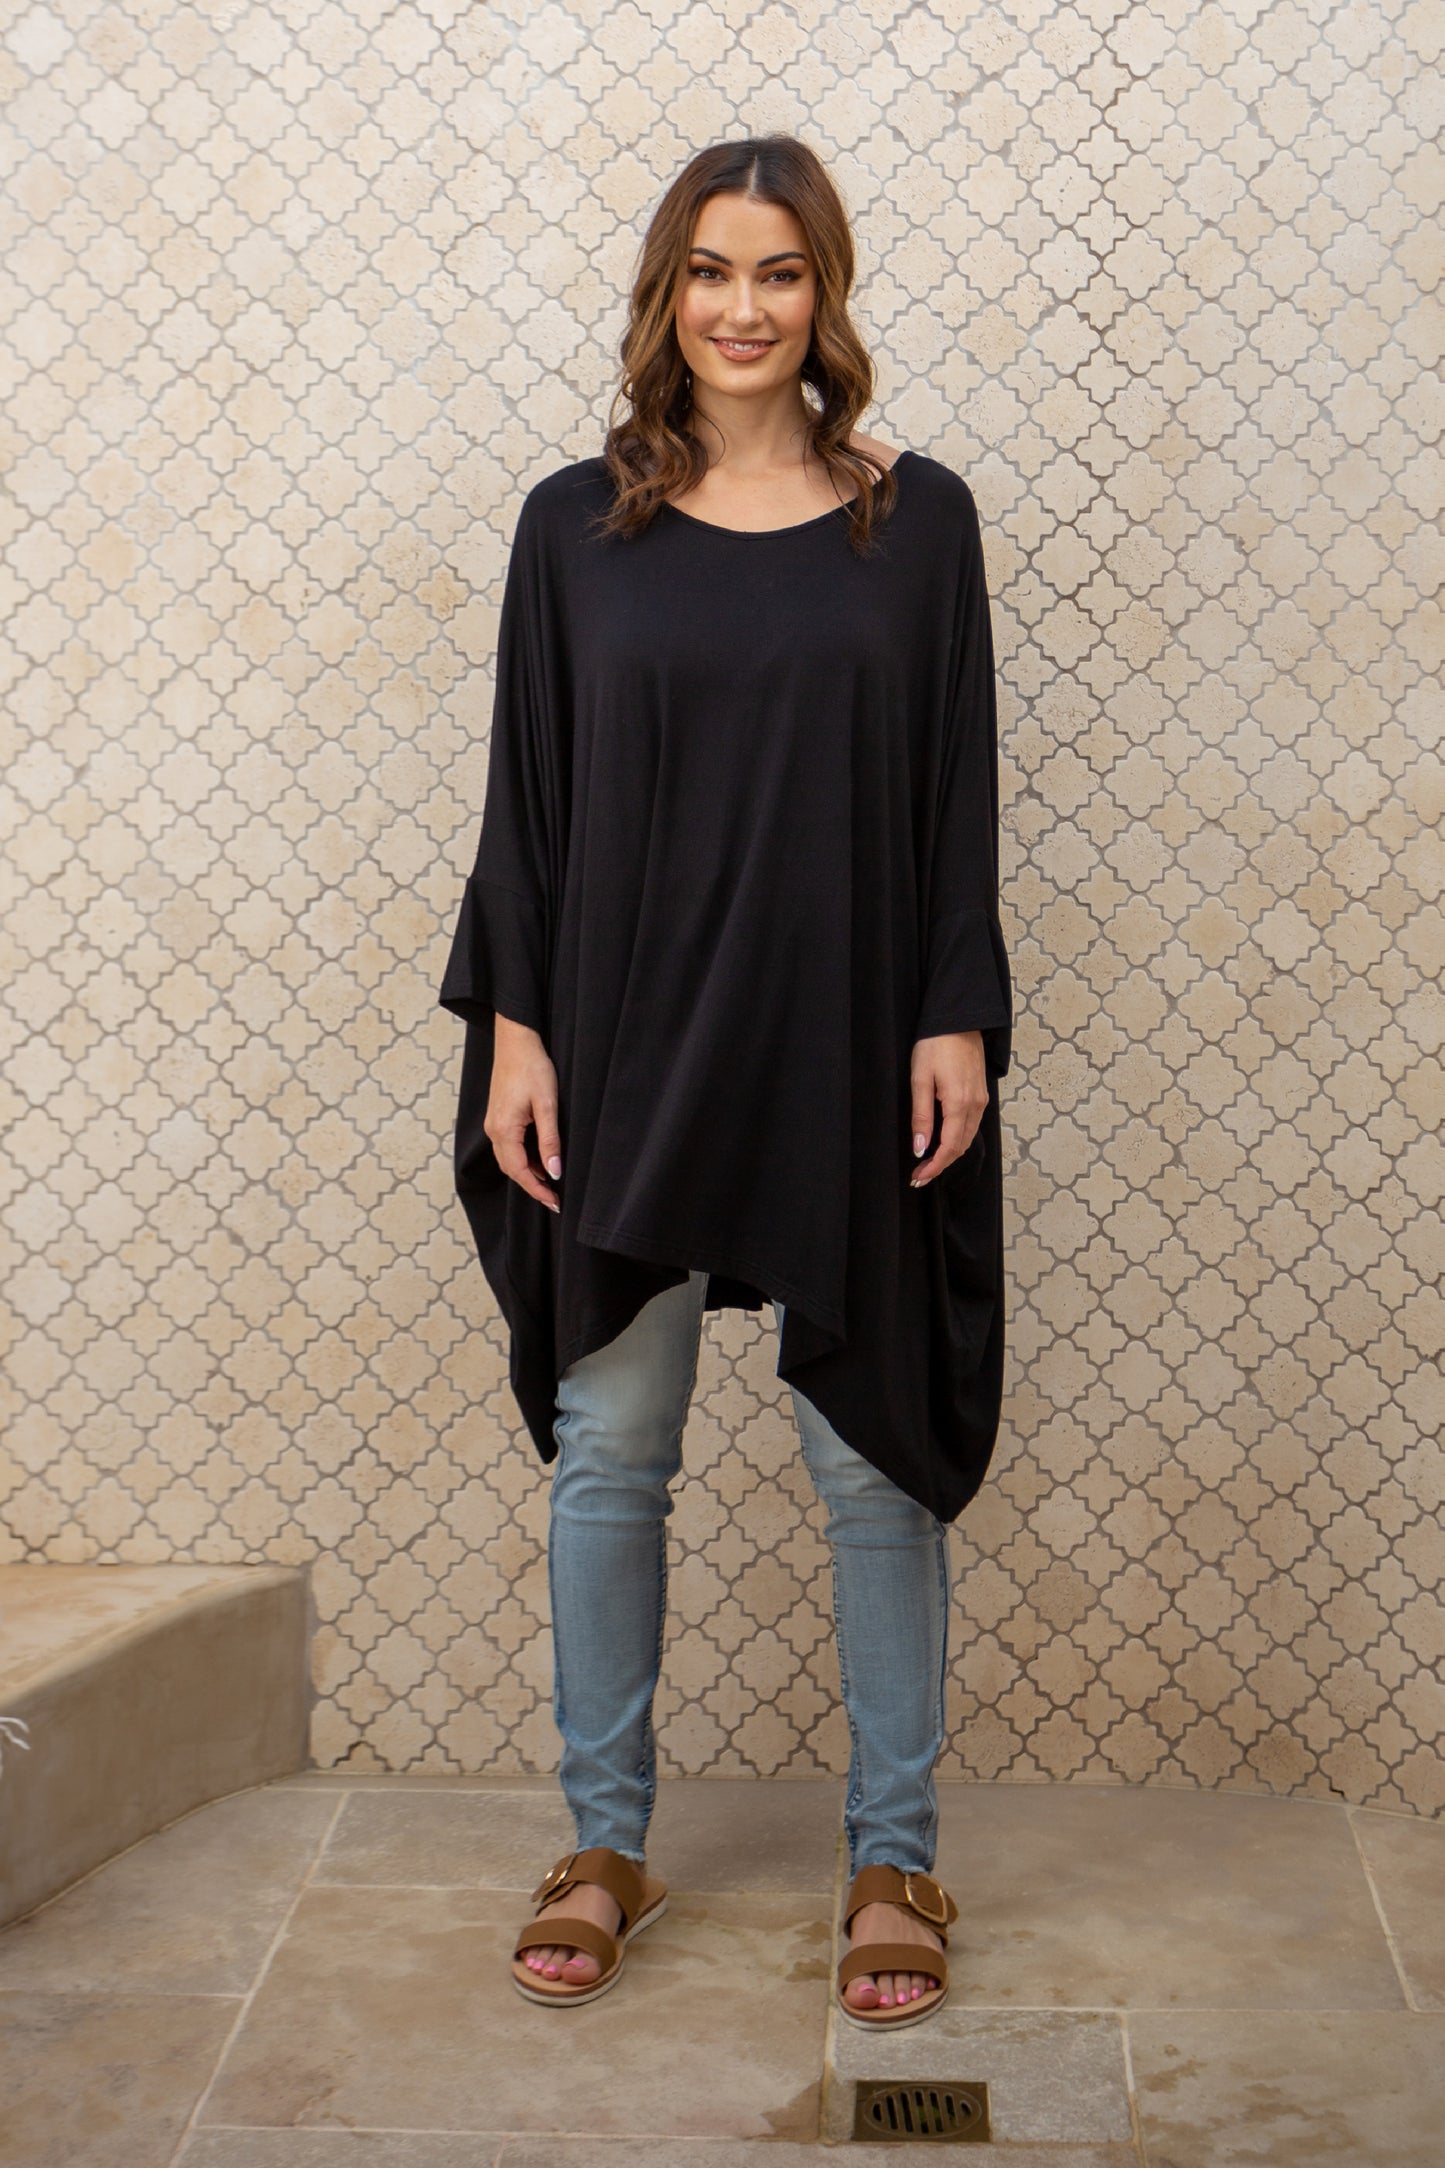 Plus-Sized Black Tops | PQ Collection | Essential Top